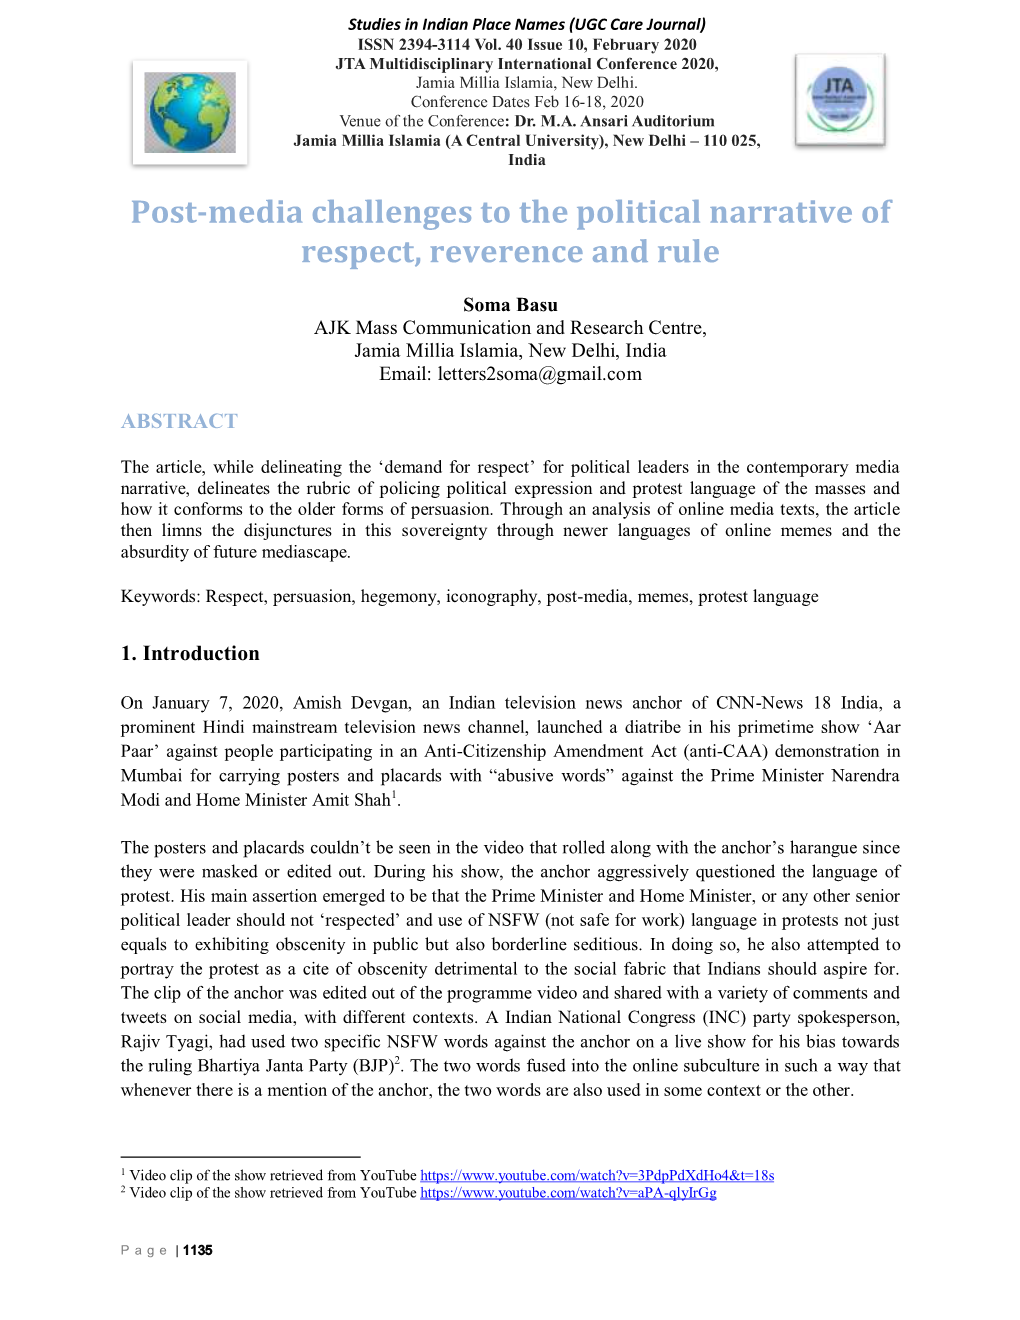 Post-Media Challenges to the Political Narrative of Respect, Reverence and Rule